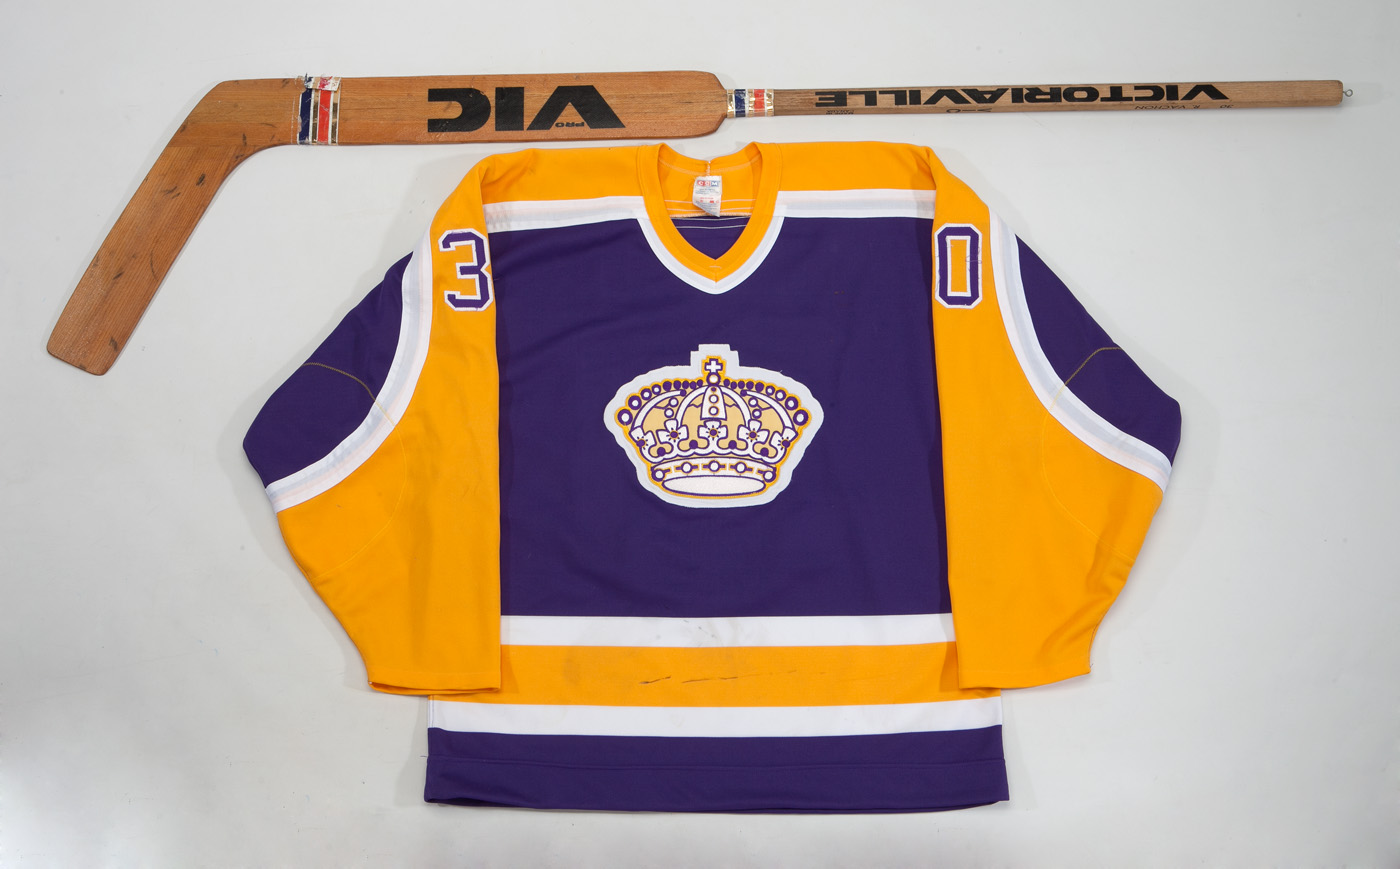 LUC ROBITAILLE Signed Los Angeles Kings Retro CCM Purple Jersey - HOF 09 -  NHL Auctions